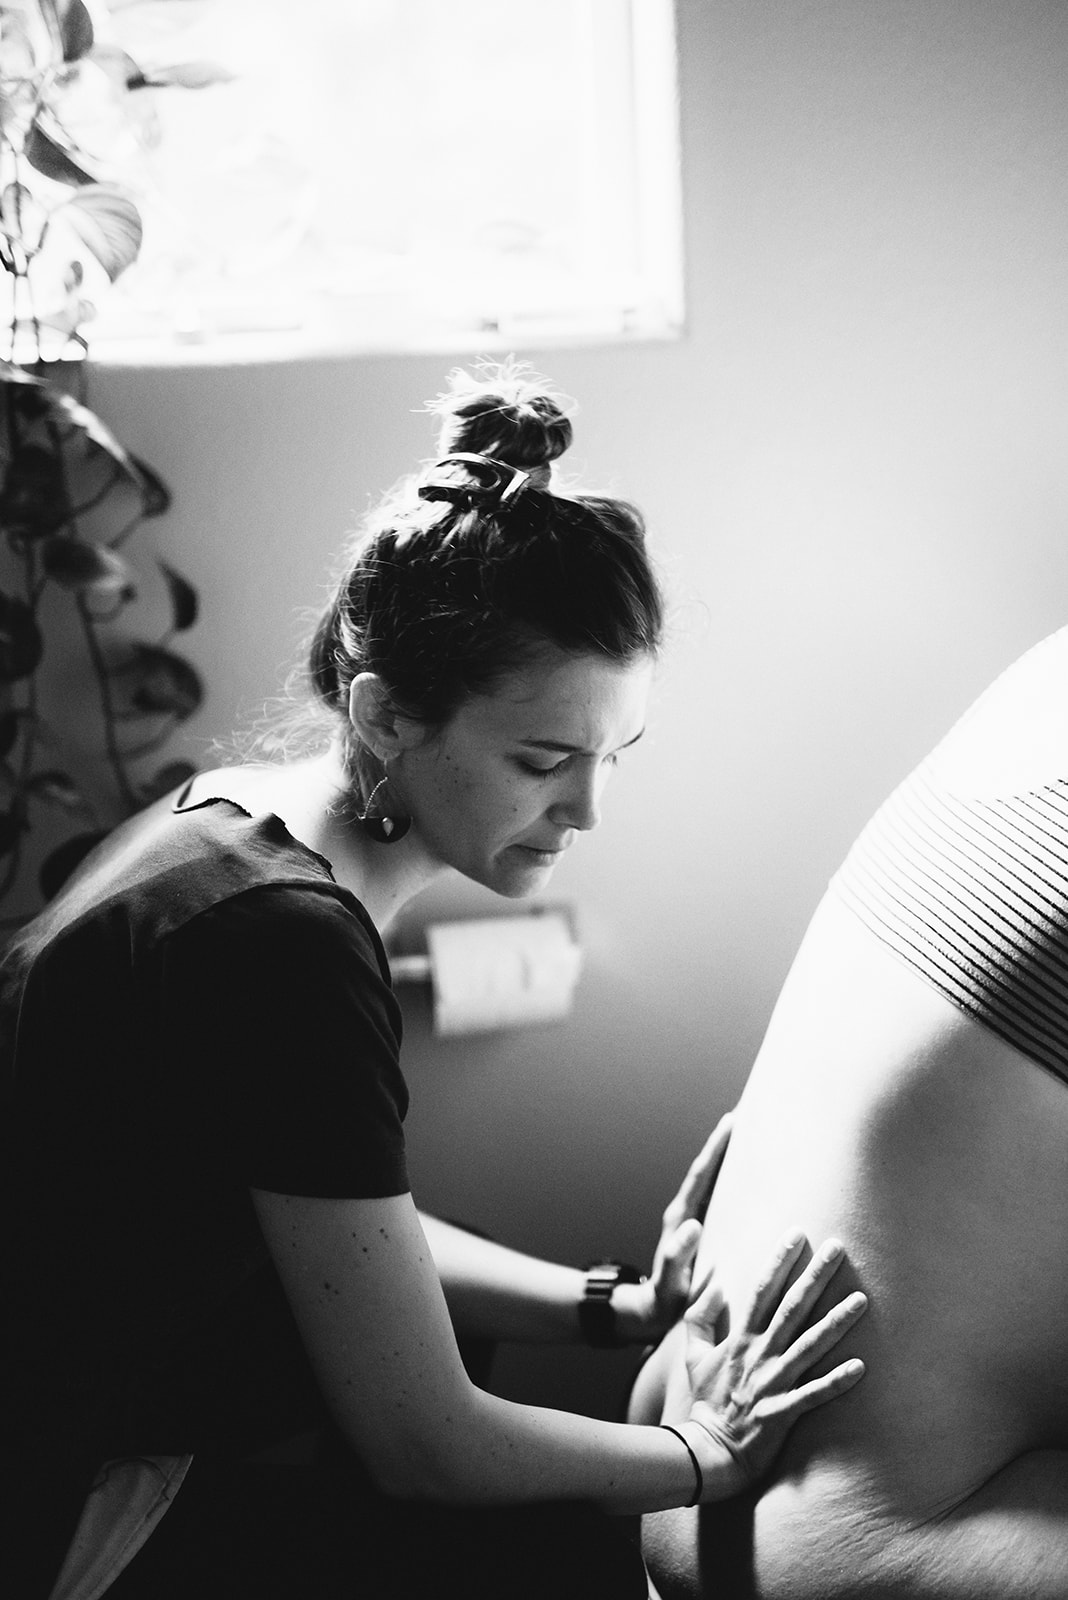 Midwife Lucy French applies pressure to the patient's back during a home birth.